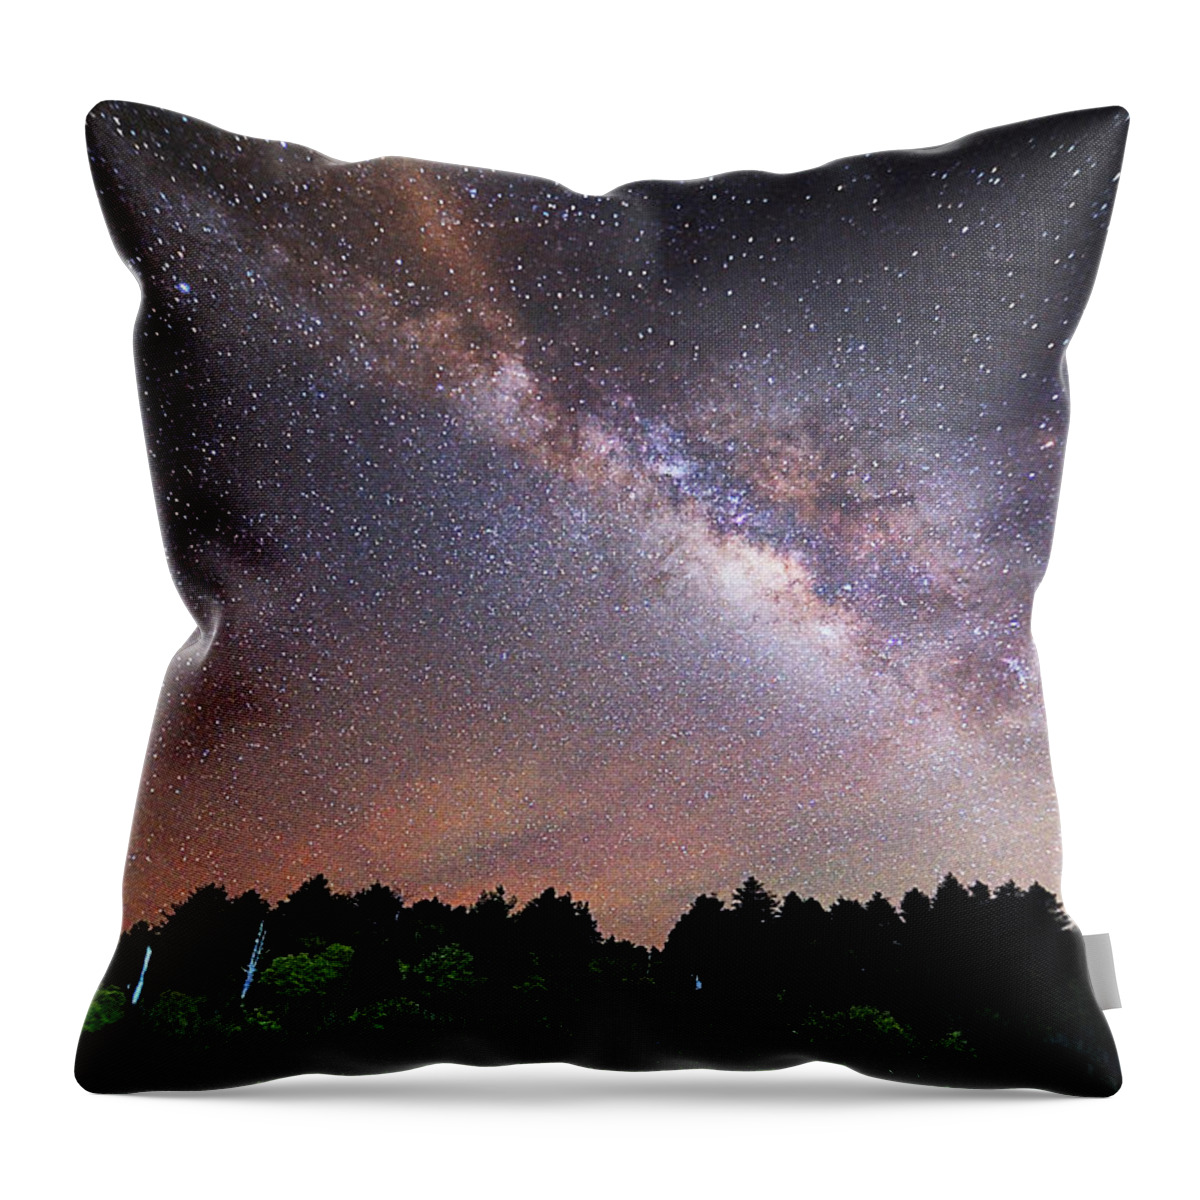 Taiwan Throw Pillow featuring the photograph Galaxy by Photo Taken By Kami (kuo, Jia-wei)